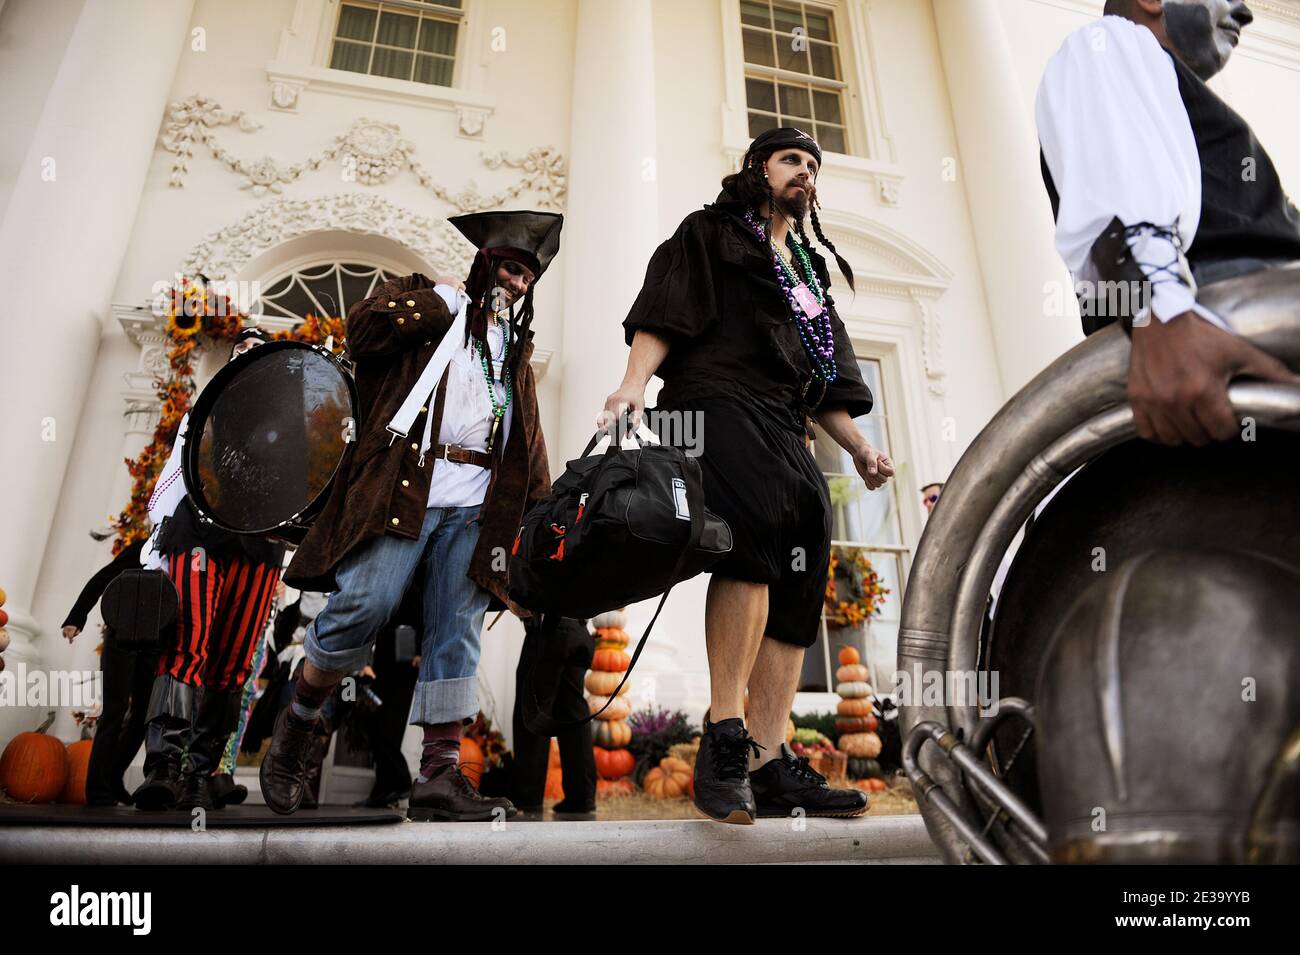 Performers in front of the North Portico of the White House, in Washington, DC, USA on October 31, 2010. US President Barack Obama and First Lady Michelle Obama will greet trick or treaters at the North Portico of the White House to celebrate Halloween. Photo by Olivier Douliery/ABACAPRESS.COM Stock Photo